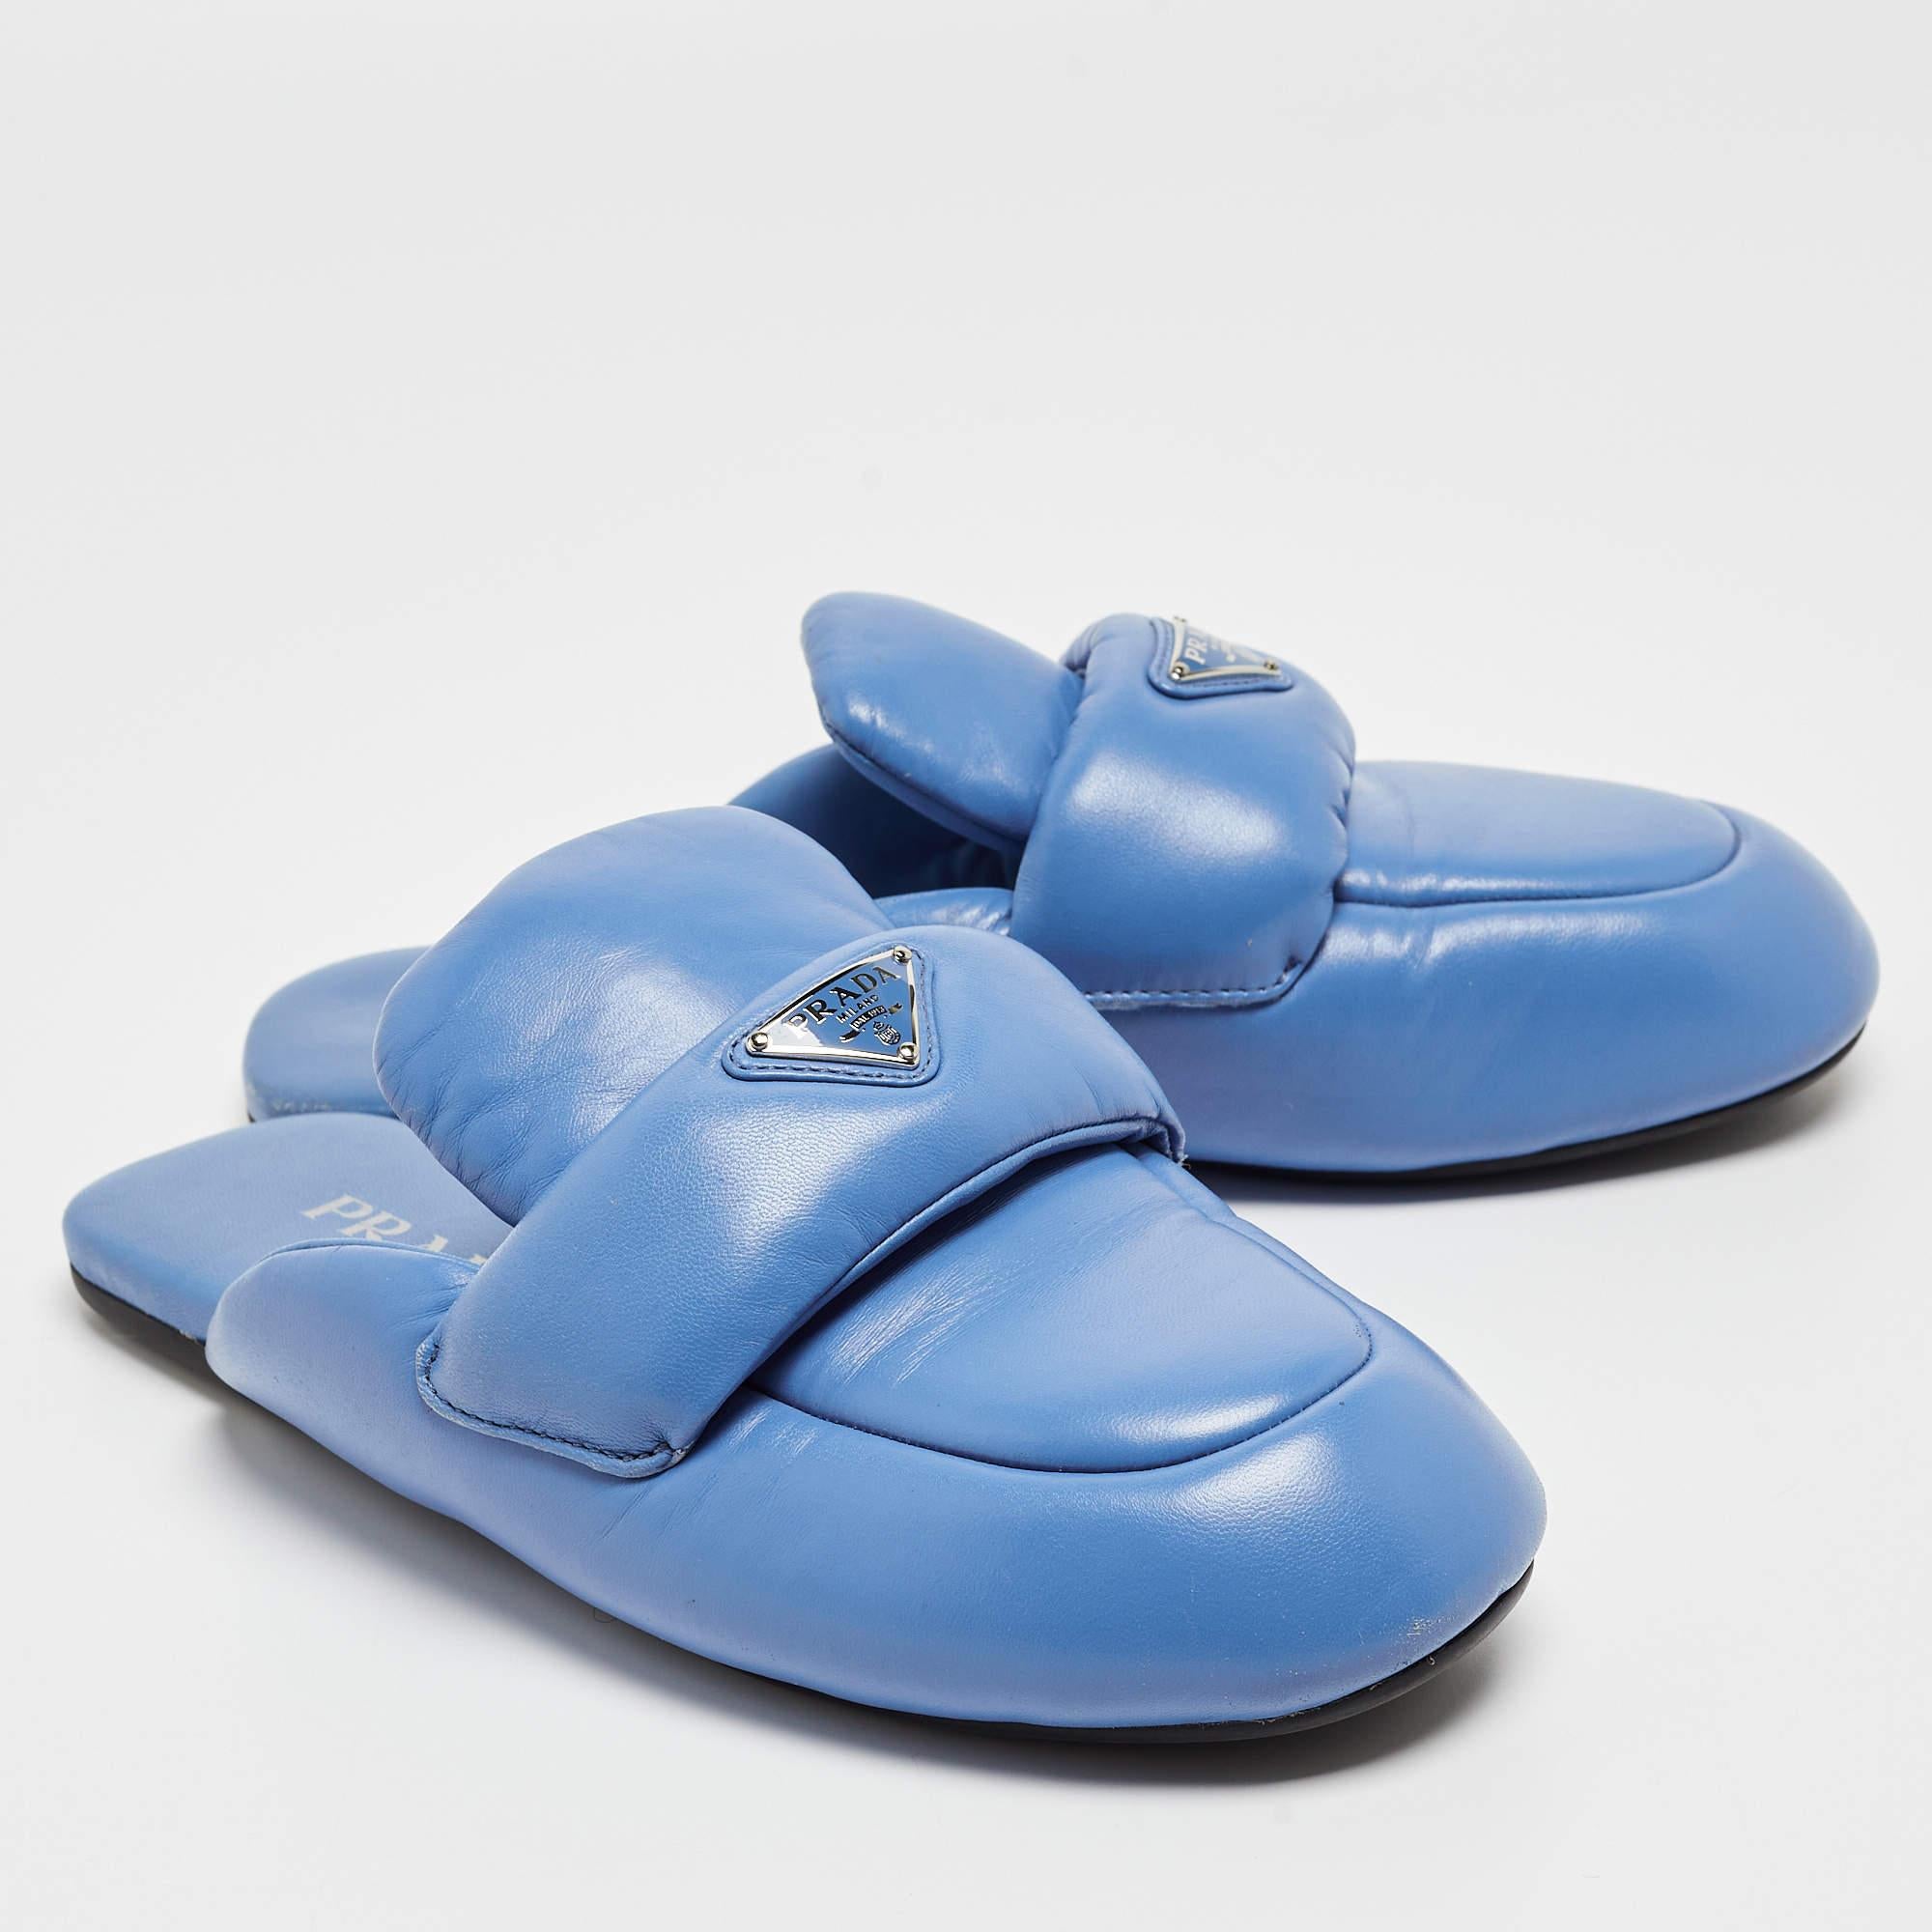 Prada Blue Leather Pantofole Padded Flat Mules Size 39 In Good Condition For Sale In Dubai, Al Qouz 2